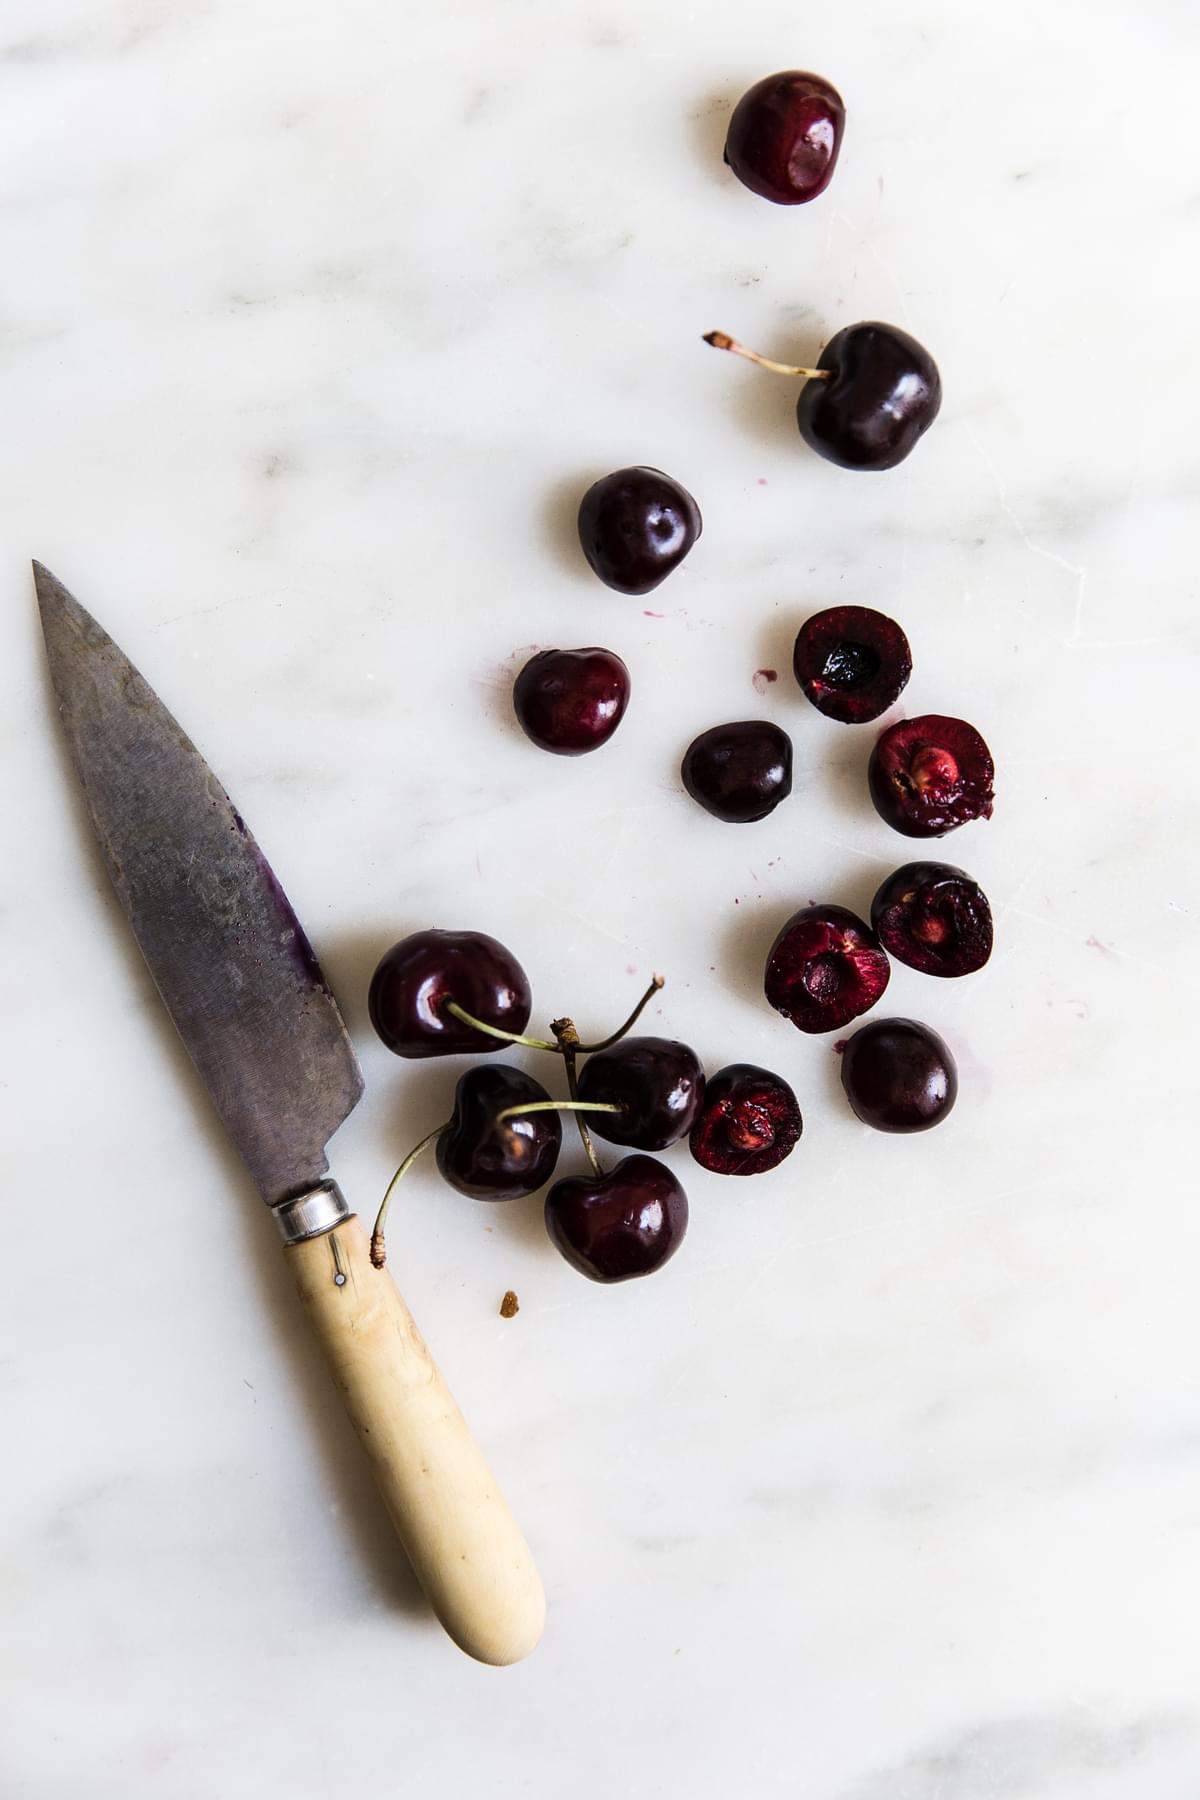 fresh cherries on a marble surface next to a paring knife